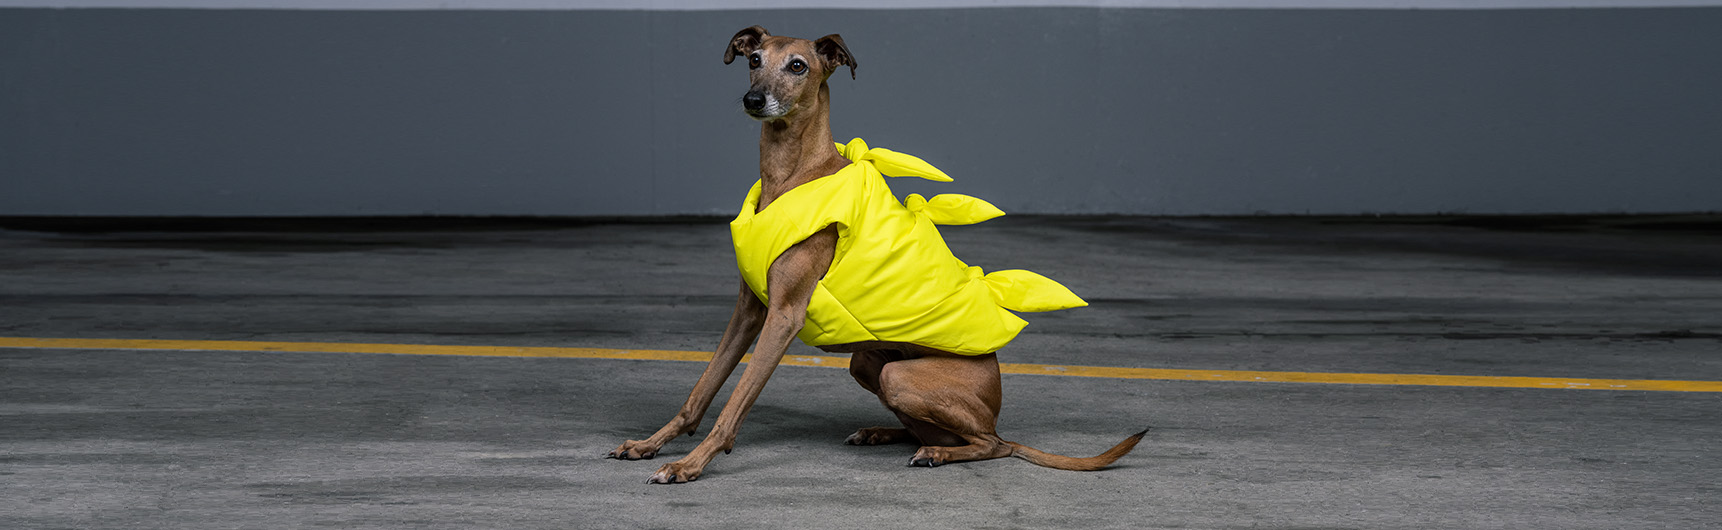 A dog with road safety jacket